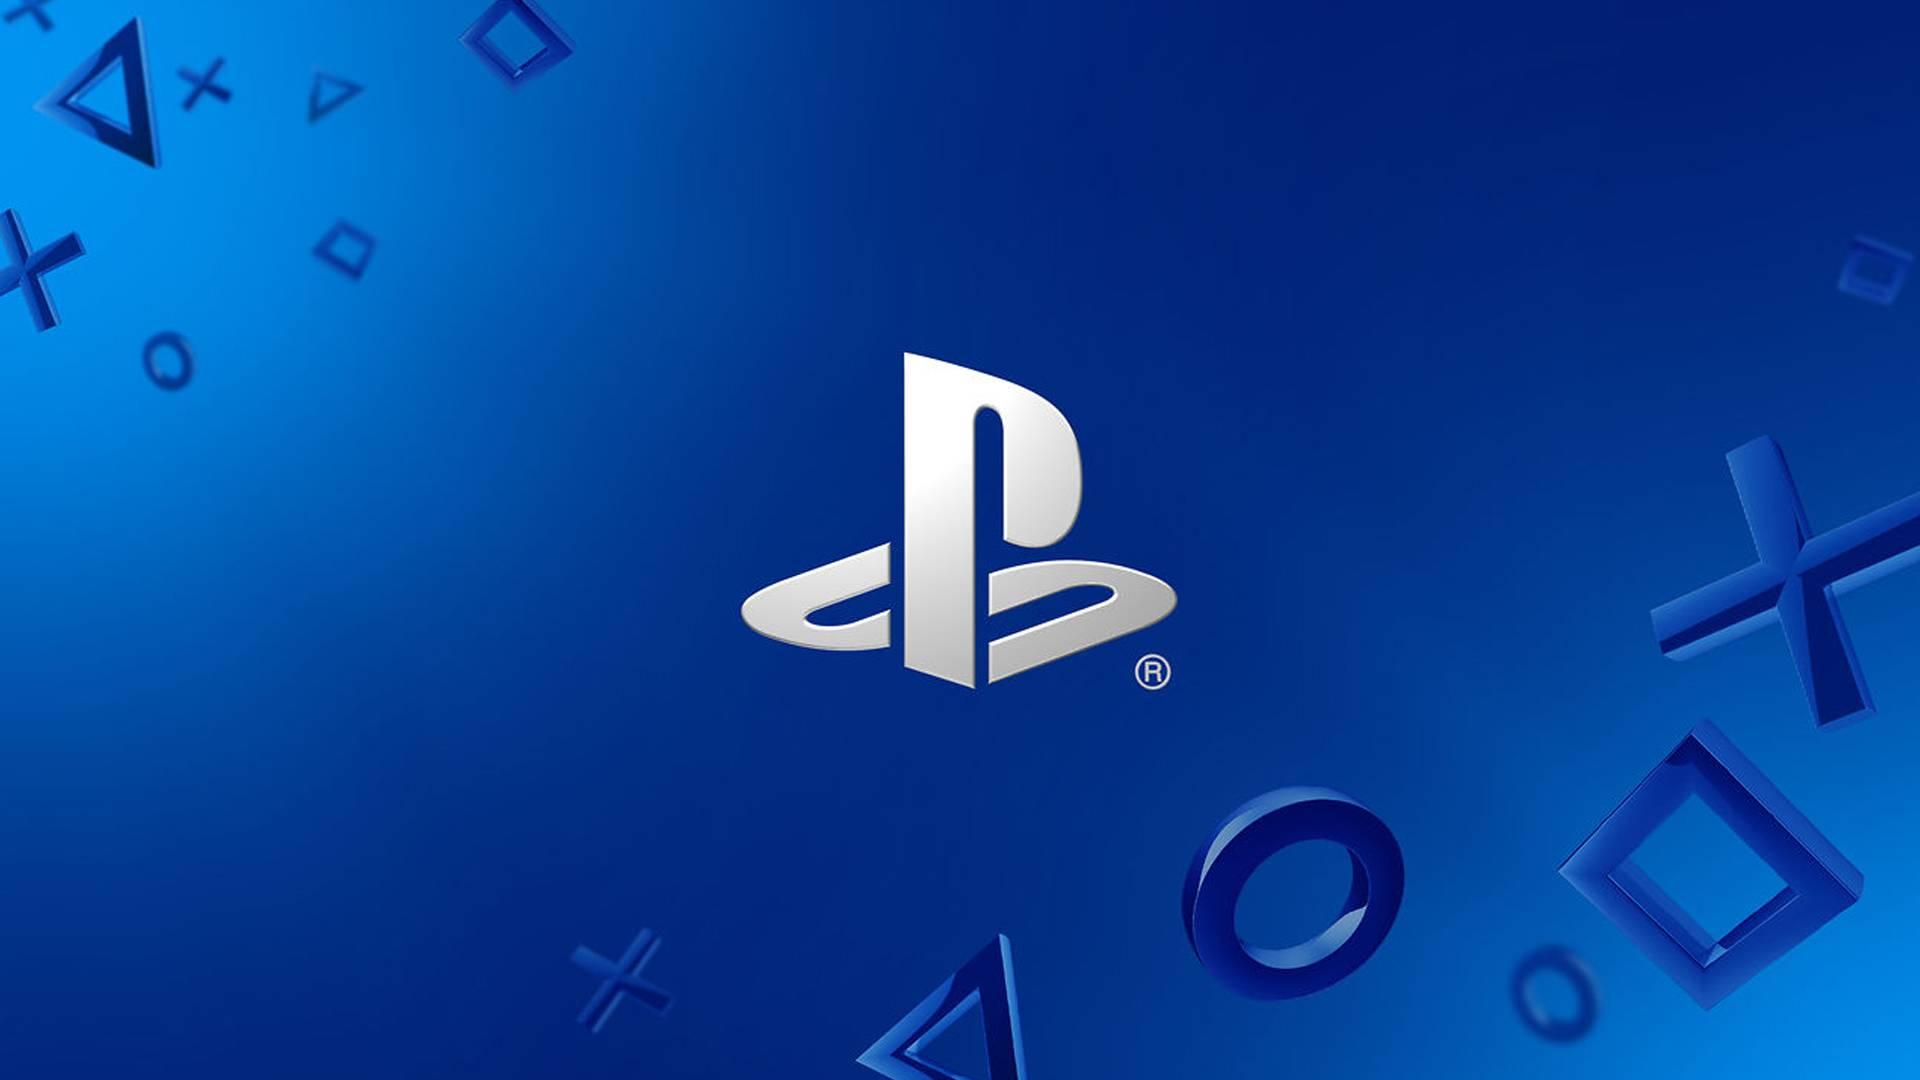 State of Play highlights new PlayStation games from third-party partners